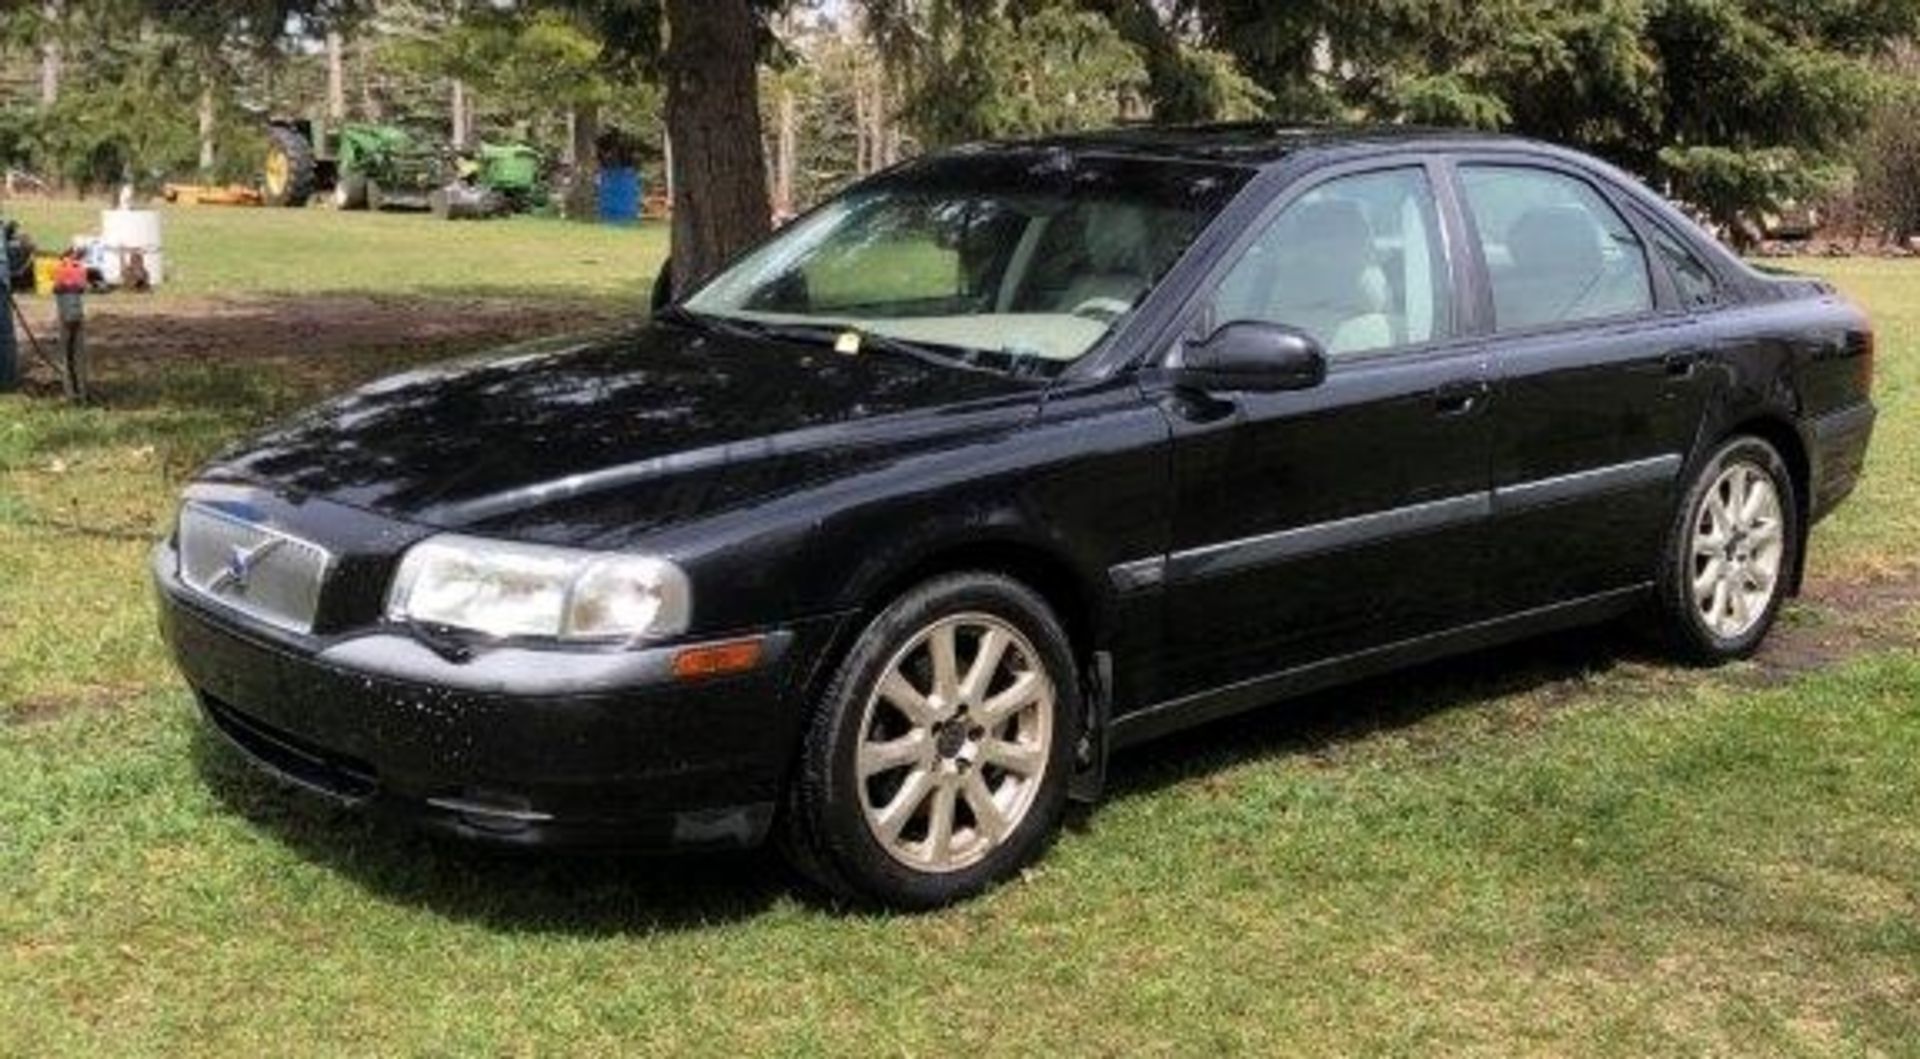 2002 VOLVO S80 SEDAN CAR, 2.9L GAS ENGINE B6294S2, 4DR, LEATHER, PD/PW/PL, 192,880 KM’S SHOWING - Image 2 of 10